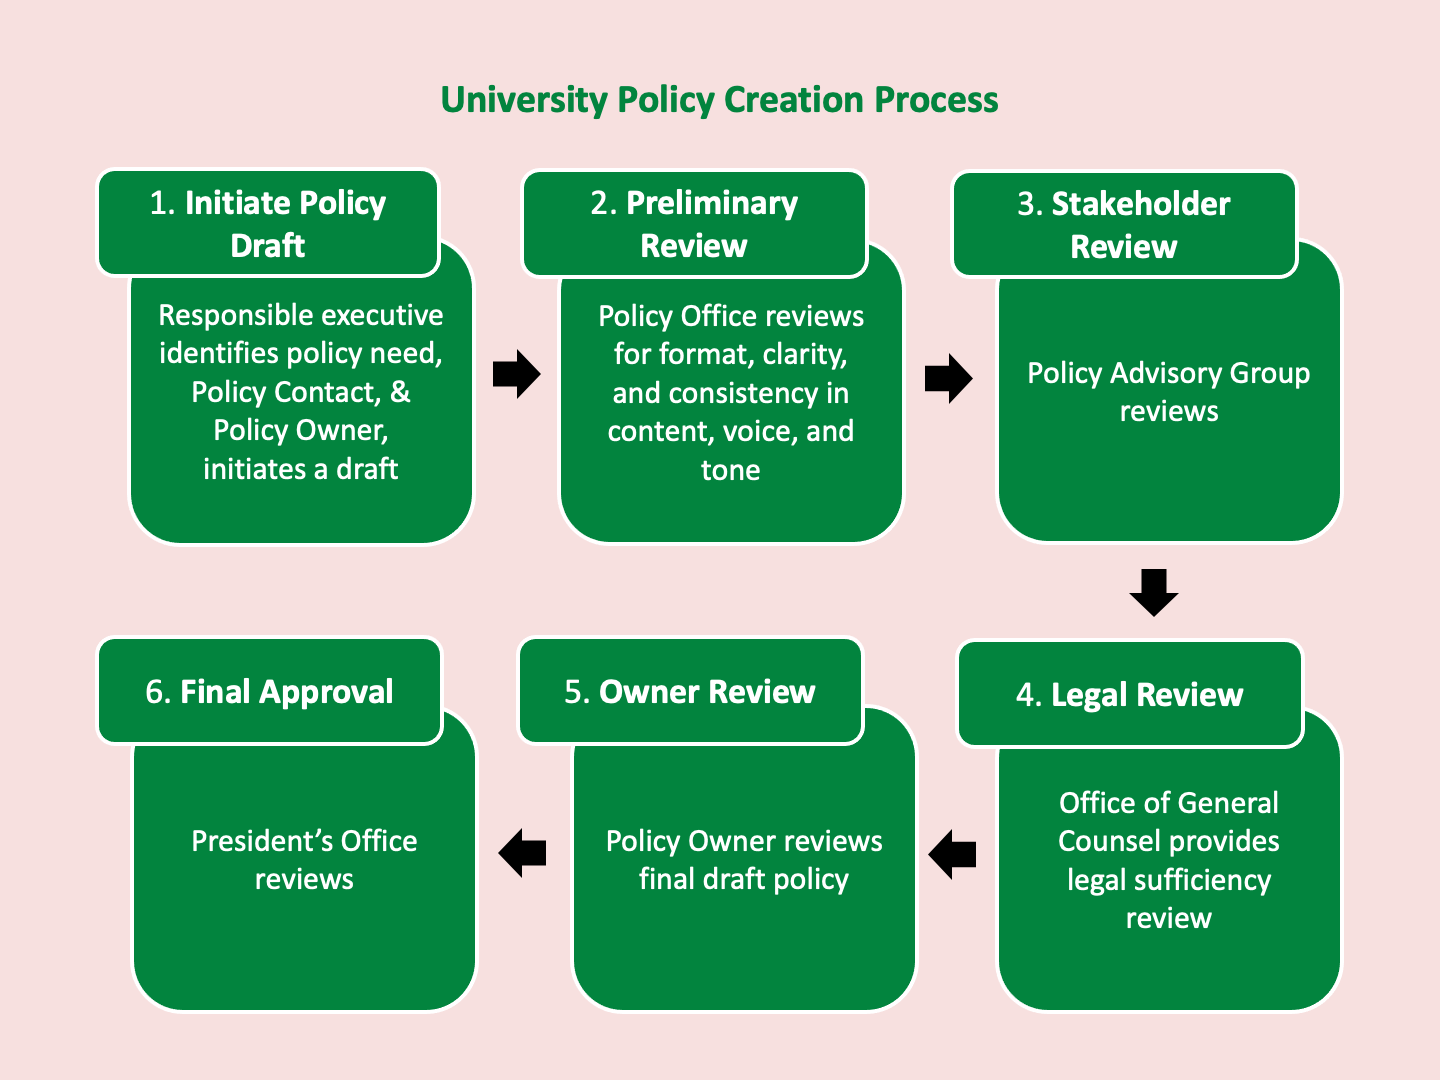 Flow chart displaying the 6 major steps for the policy creation process, including: 1. Responsible executive identifies a need, a policy contact & a policy owner, and initiates a draft with the Policy Office; 2. Policy Office reviewing draft for formatting consistency; 3. Policy Advisory Group review; 4. Office of General Counsel Review; 5. Policy Owner review; and 6. Office of President review.